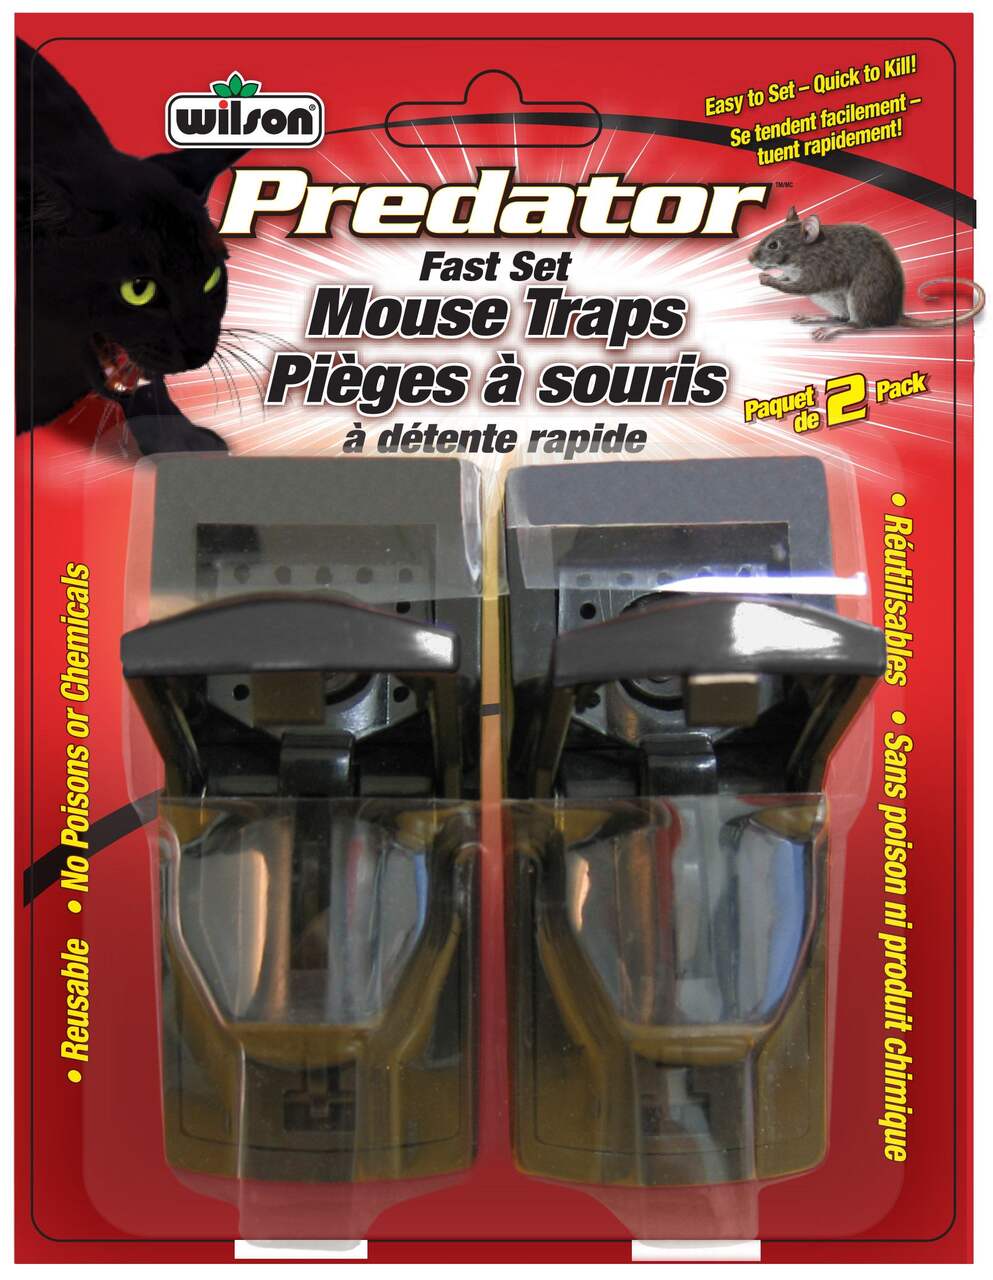 https://media-www.canadiantire.ca/product/seasonal-gardening/gardening/weed-insect-rodent-control/0593597/predator-fast-set-trap-2pk-f768d0a9-f60e-4042-8c19-2bfd708f7ba7-jpgrendition.jpg?imdensity=1&imwidth=640&impolicy=mZoom